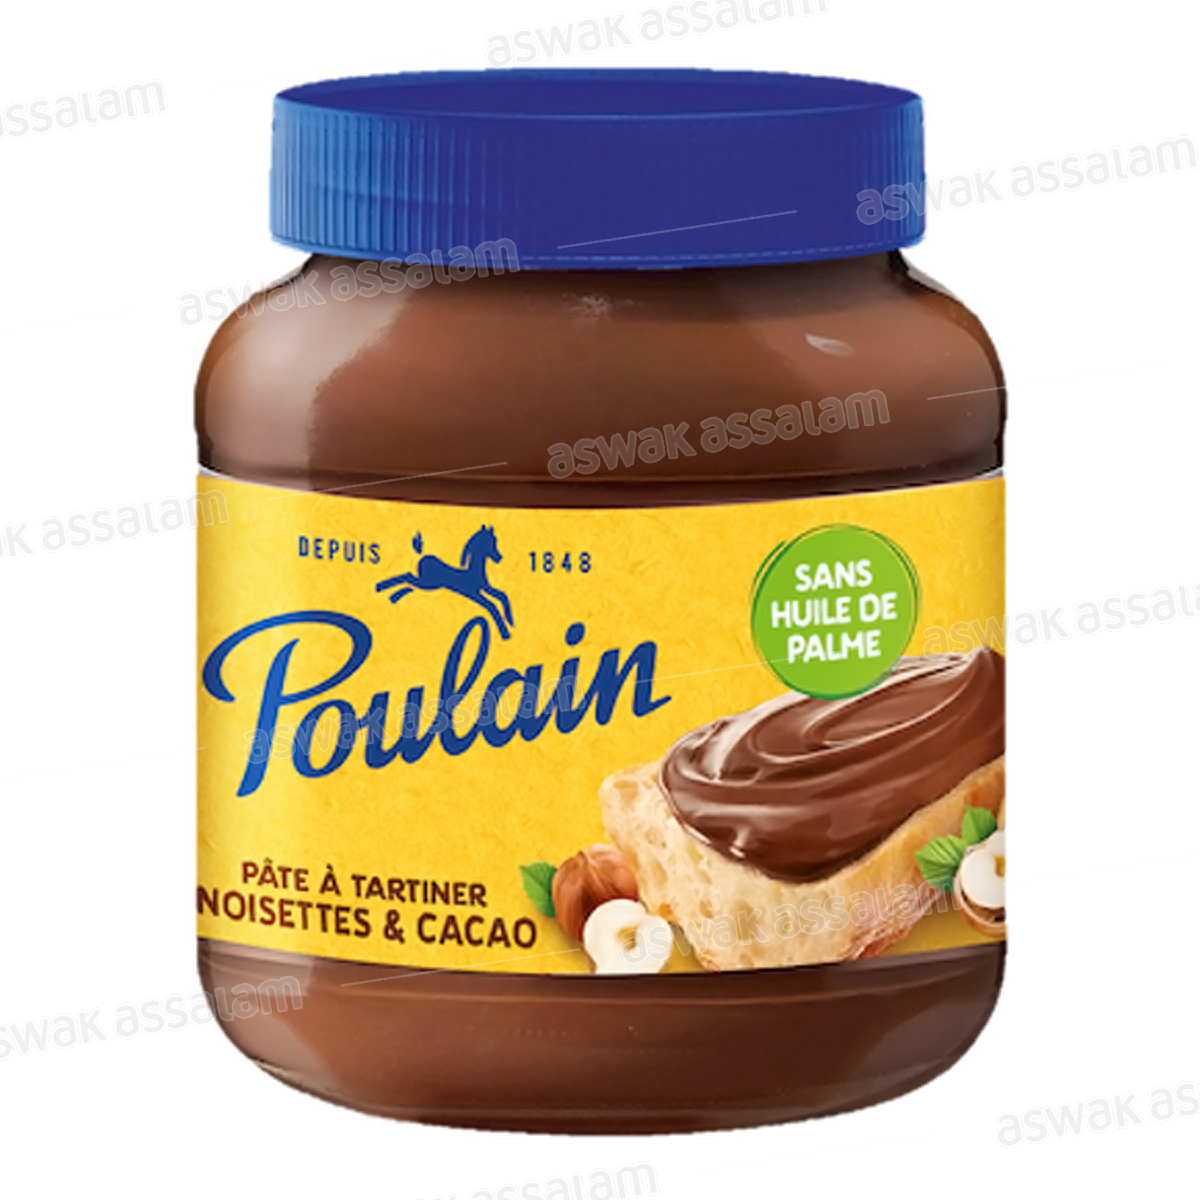 PATE A TARTINER NOISETTES & CACAO 400G POULAIN